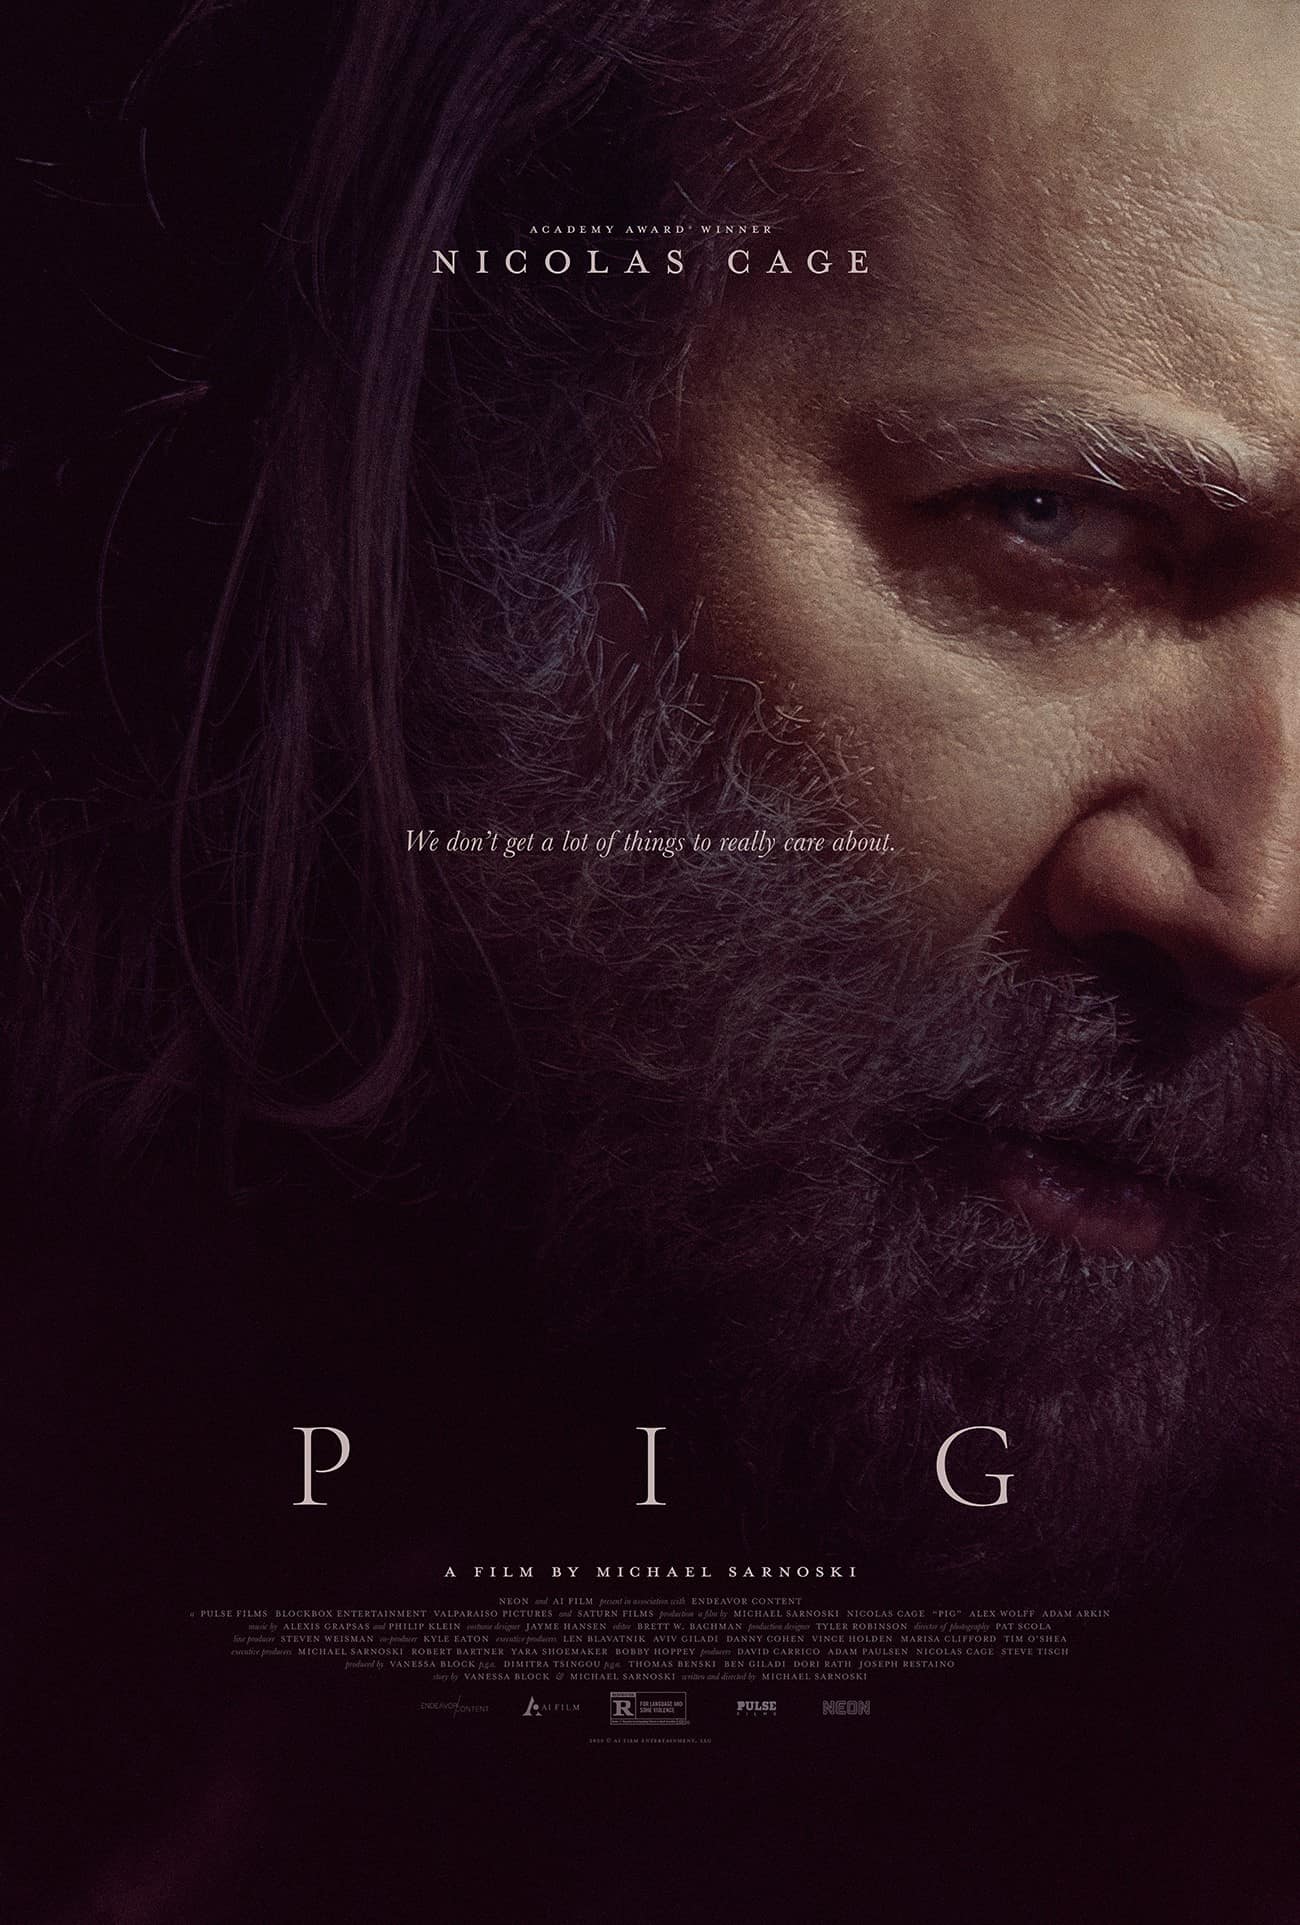 Pig (2021) 15 Best Nature Movies to Add in Your Watchlist